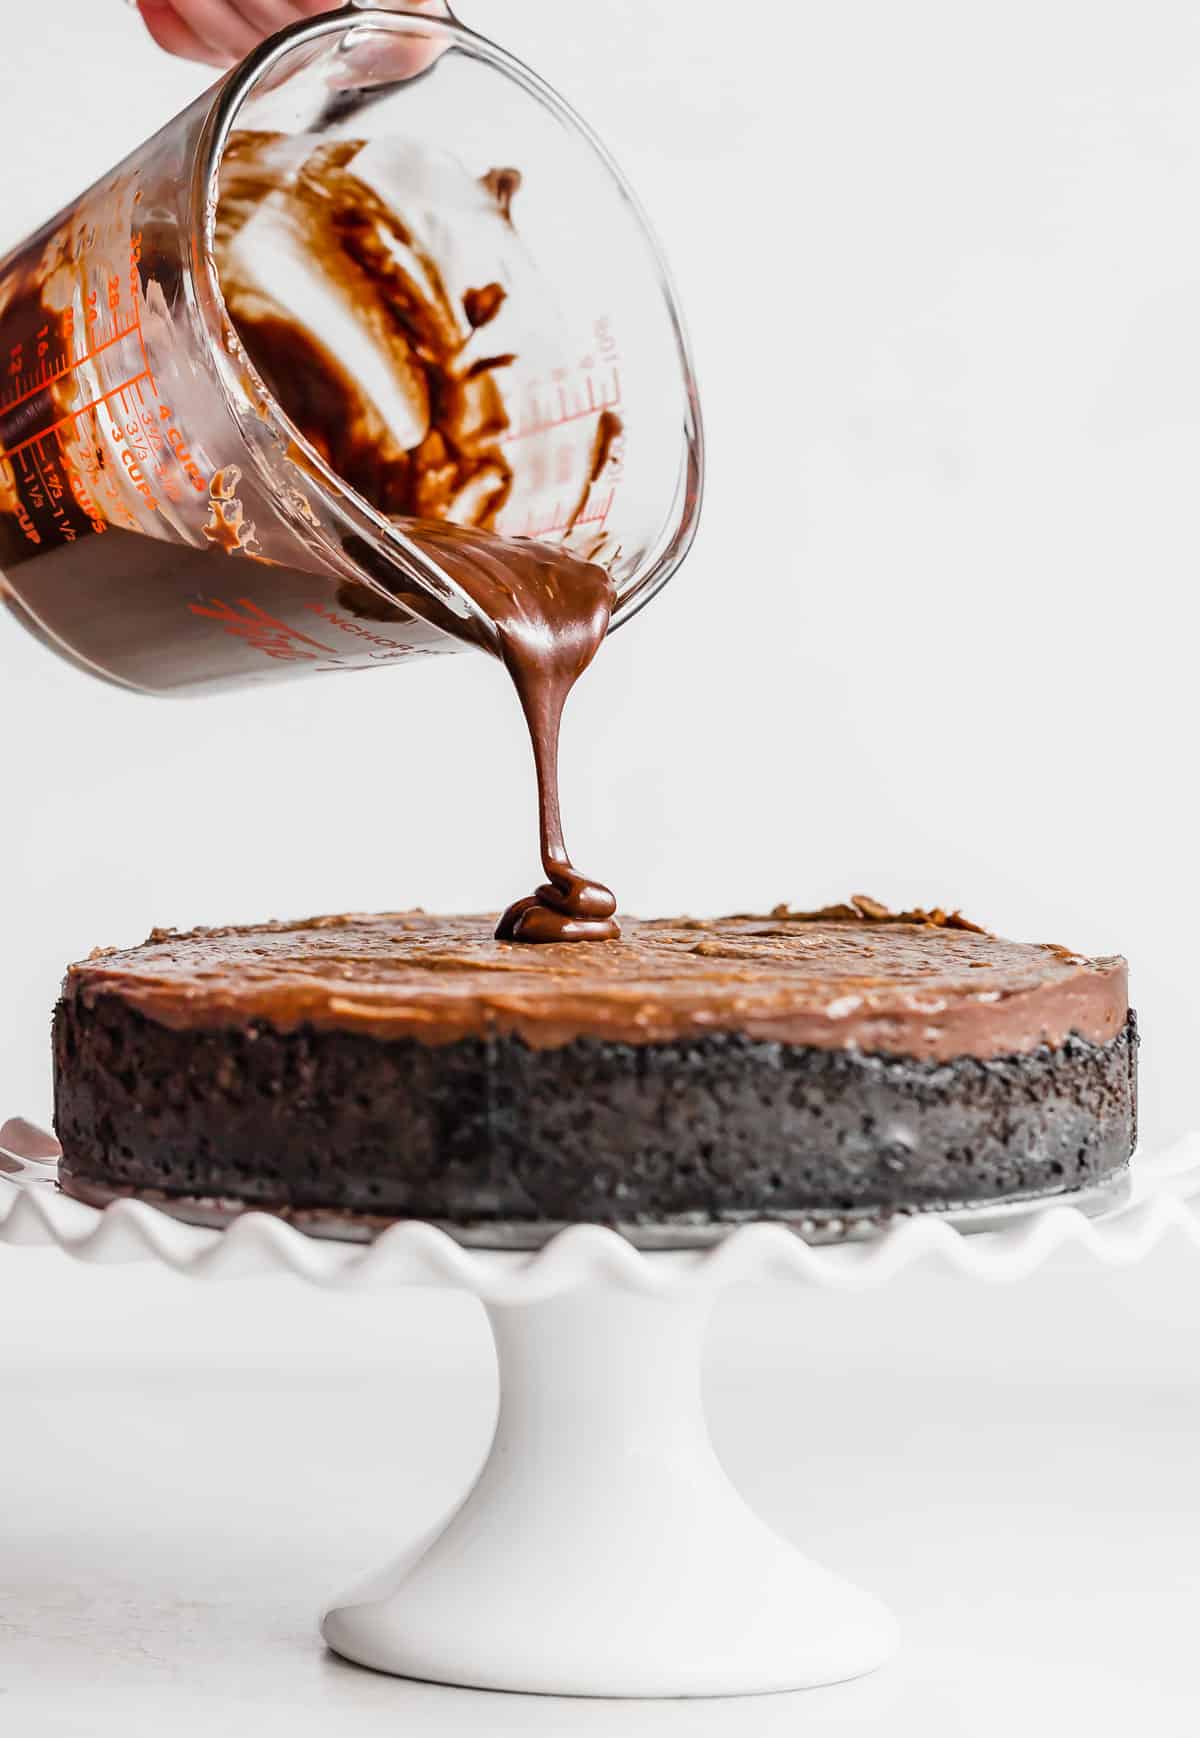 Nutella ganache being poured overtop a Nutella Cheesecake on a white cake stand.